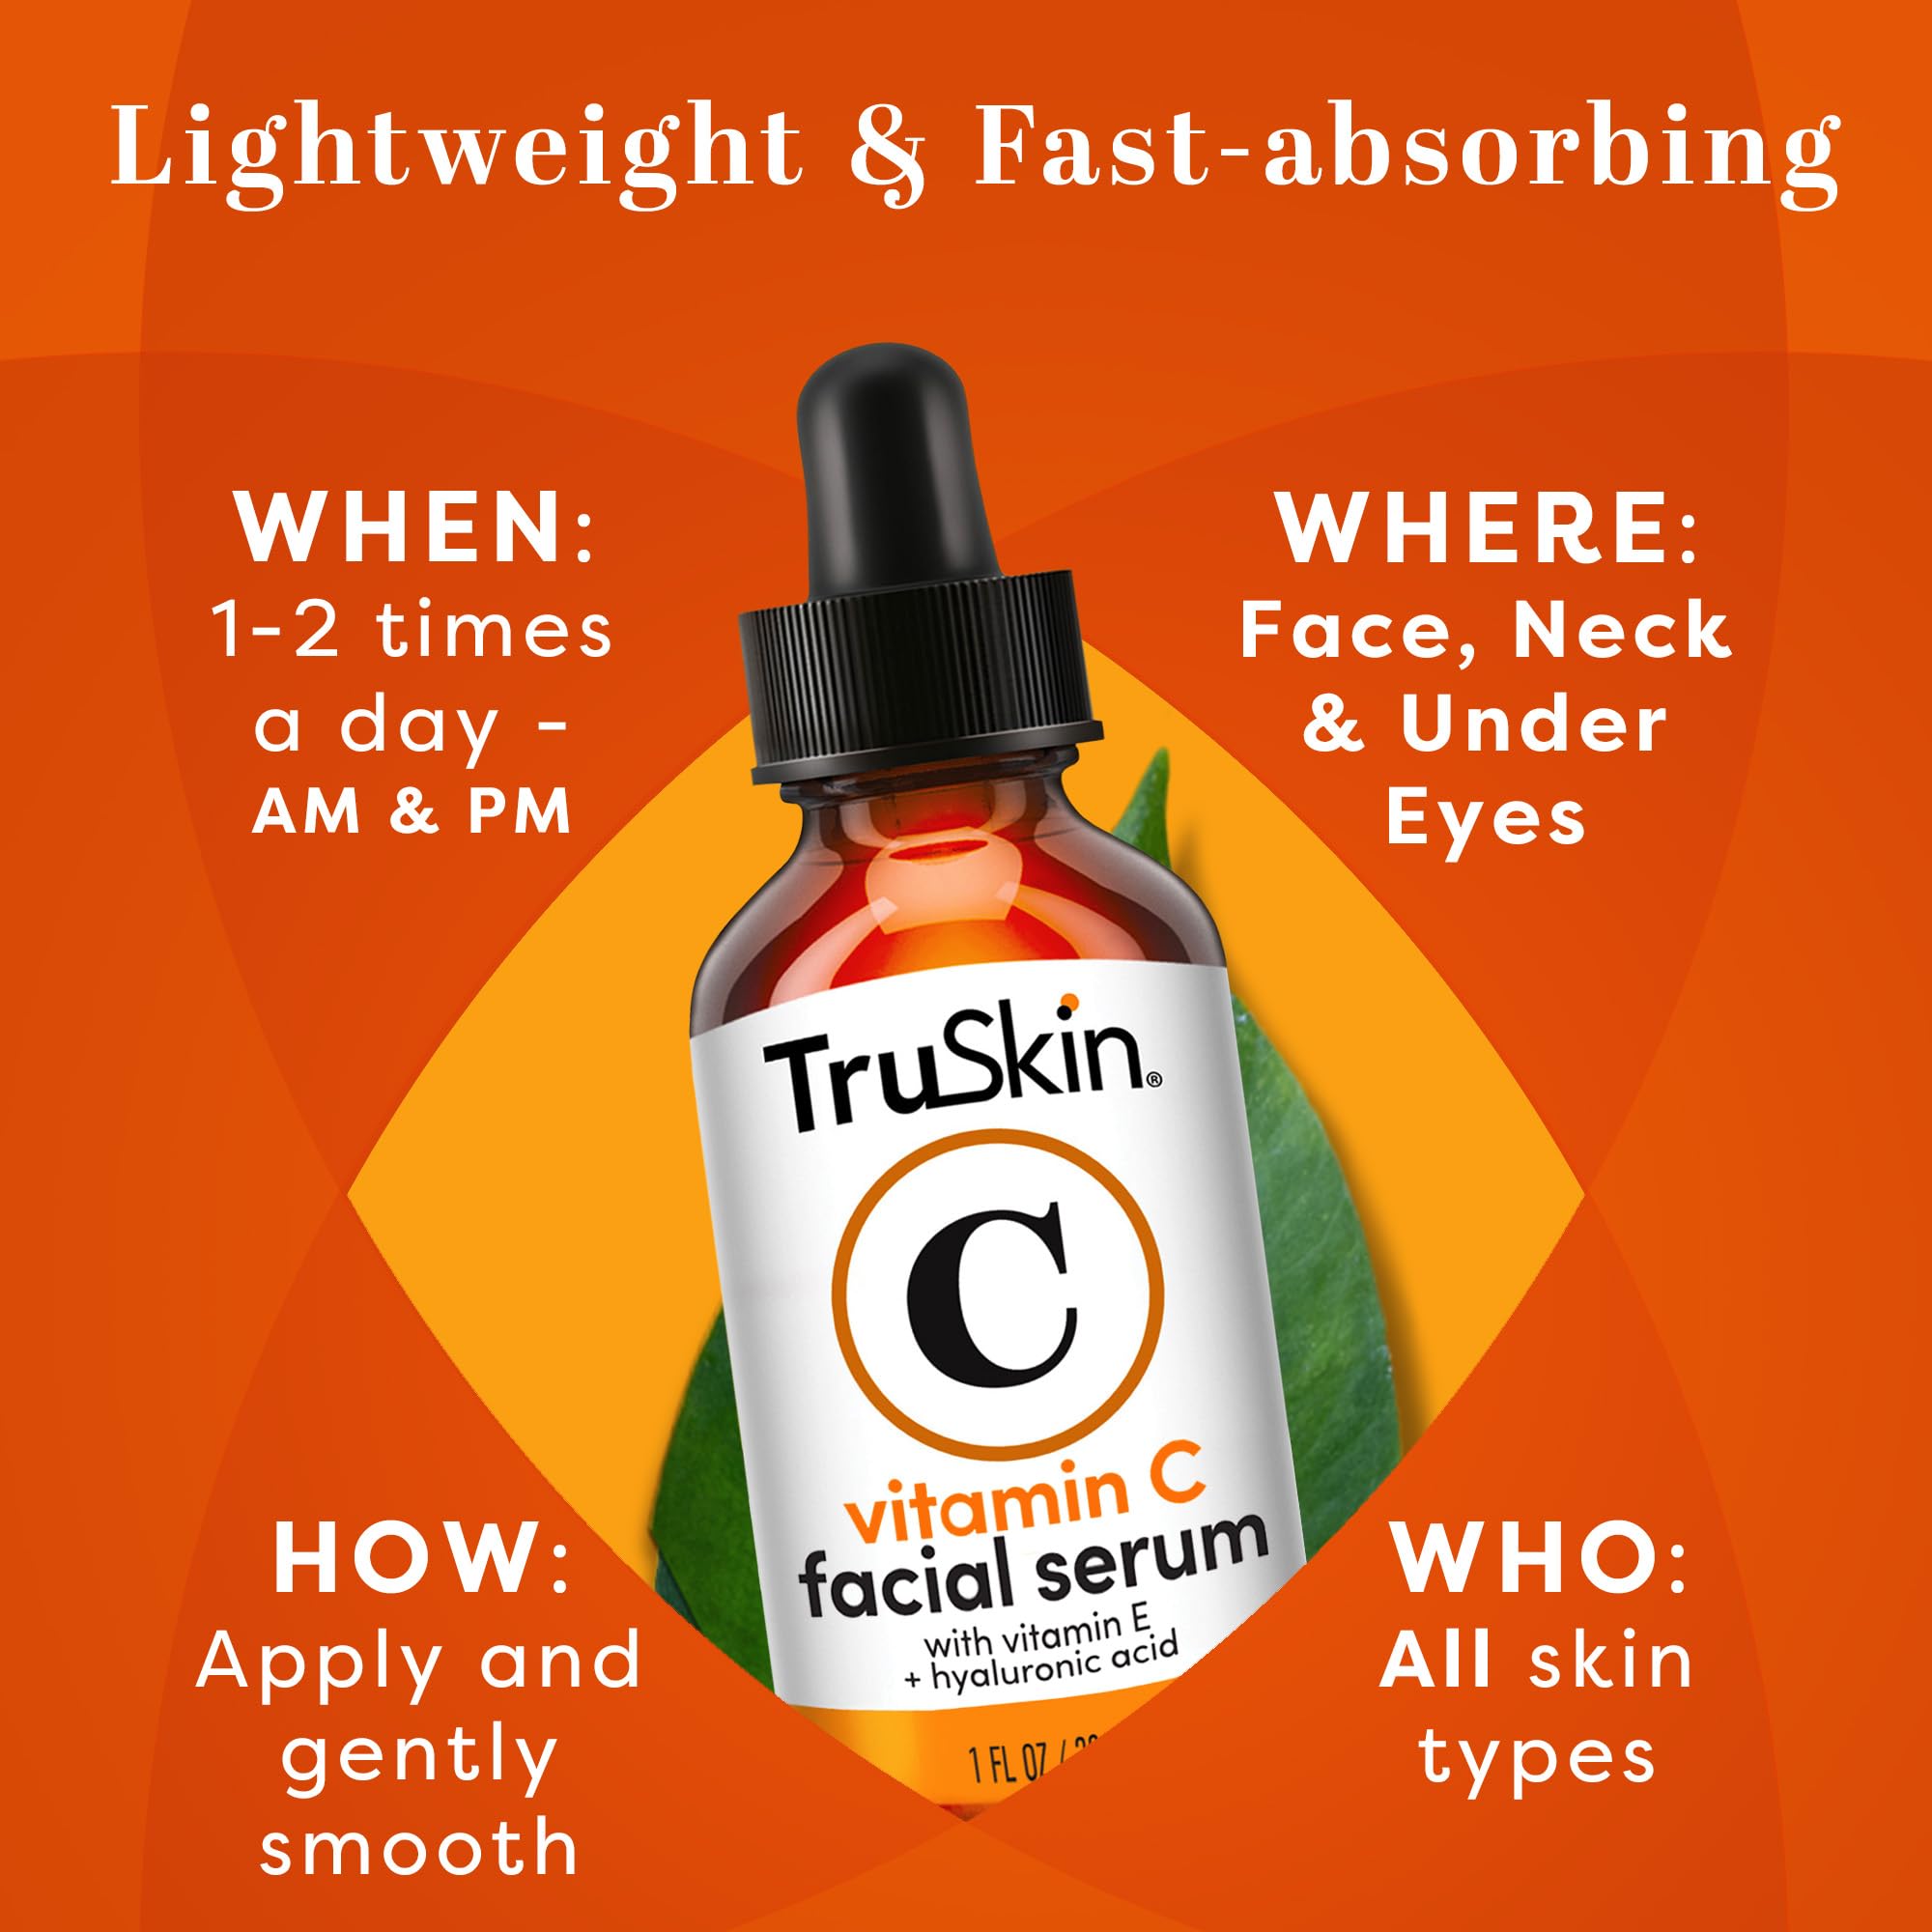 TruSkin Vitamin C Serum & Liquid Exfoliant Duo – Vitamin C Face Serum 1oz & AHA, BHA, PHA Liquid Exfoliant 4.2oz for Brighter, Smoother Skin – Even Skin Tone & Texture, Improve Fine Lines & Wrinkles